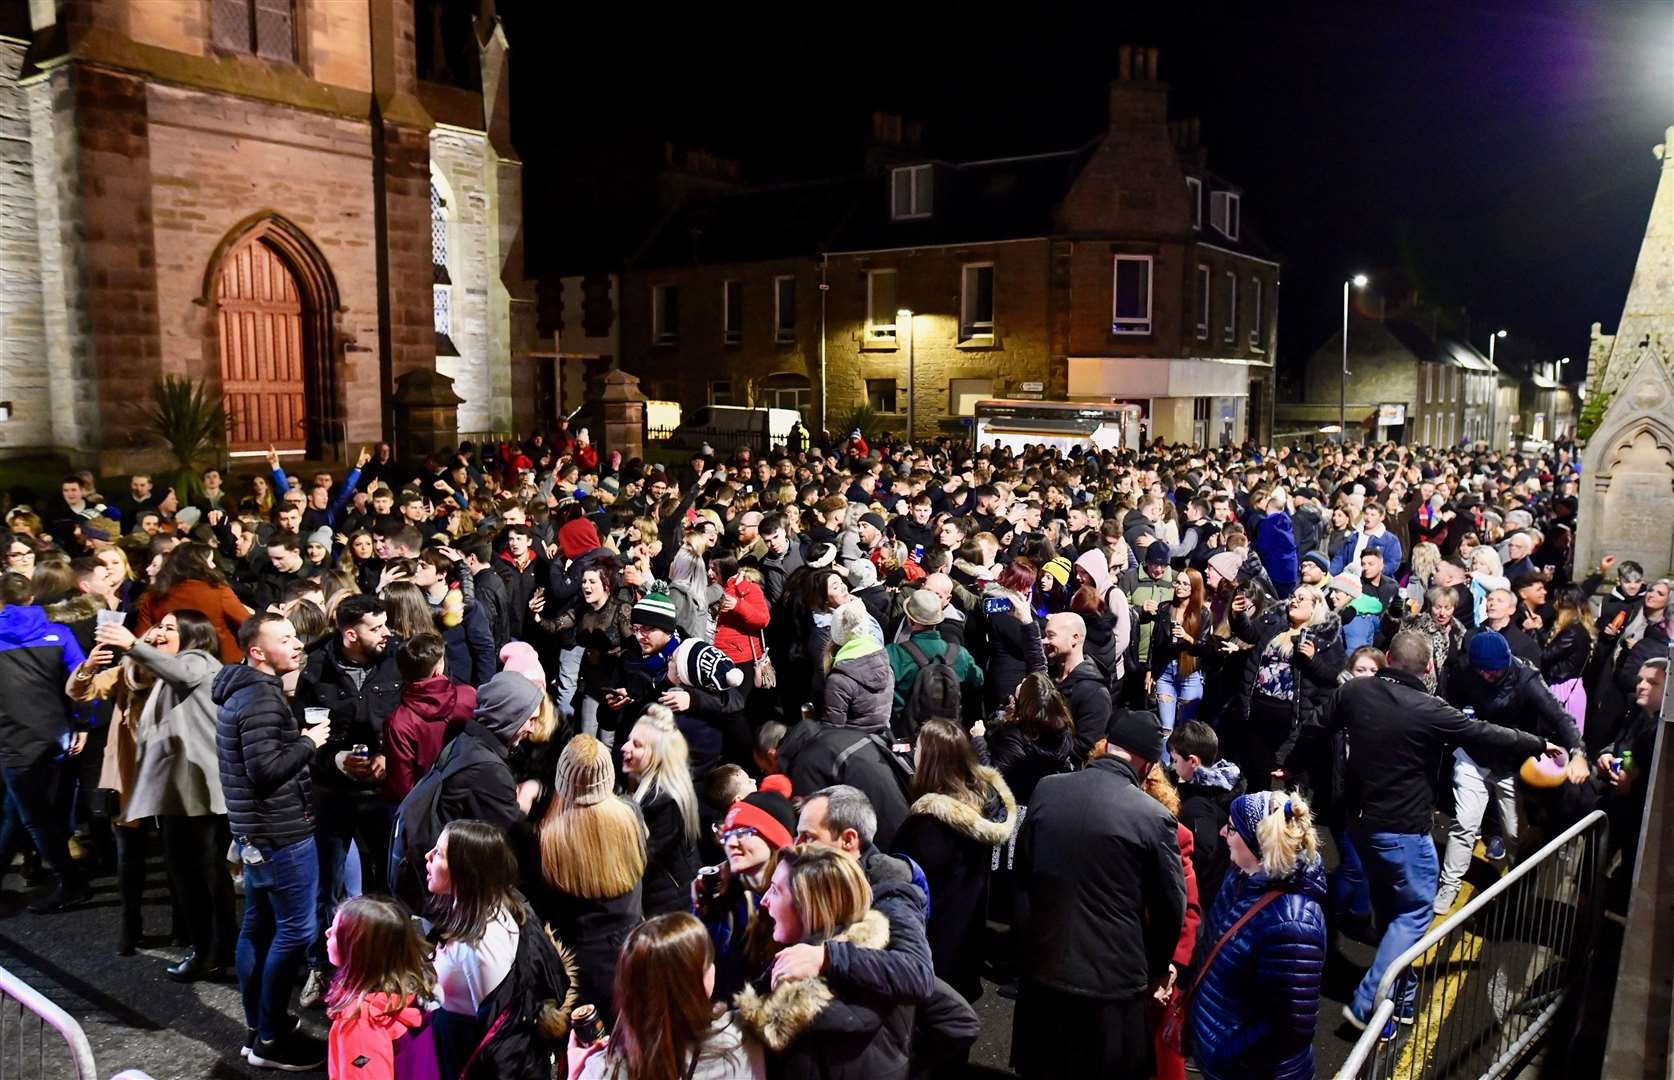 Organisers estimated the good-natured Hogmanay street party crowd in Thurso at around 1000. Picture: John Wright Studio